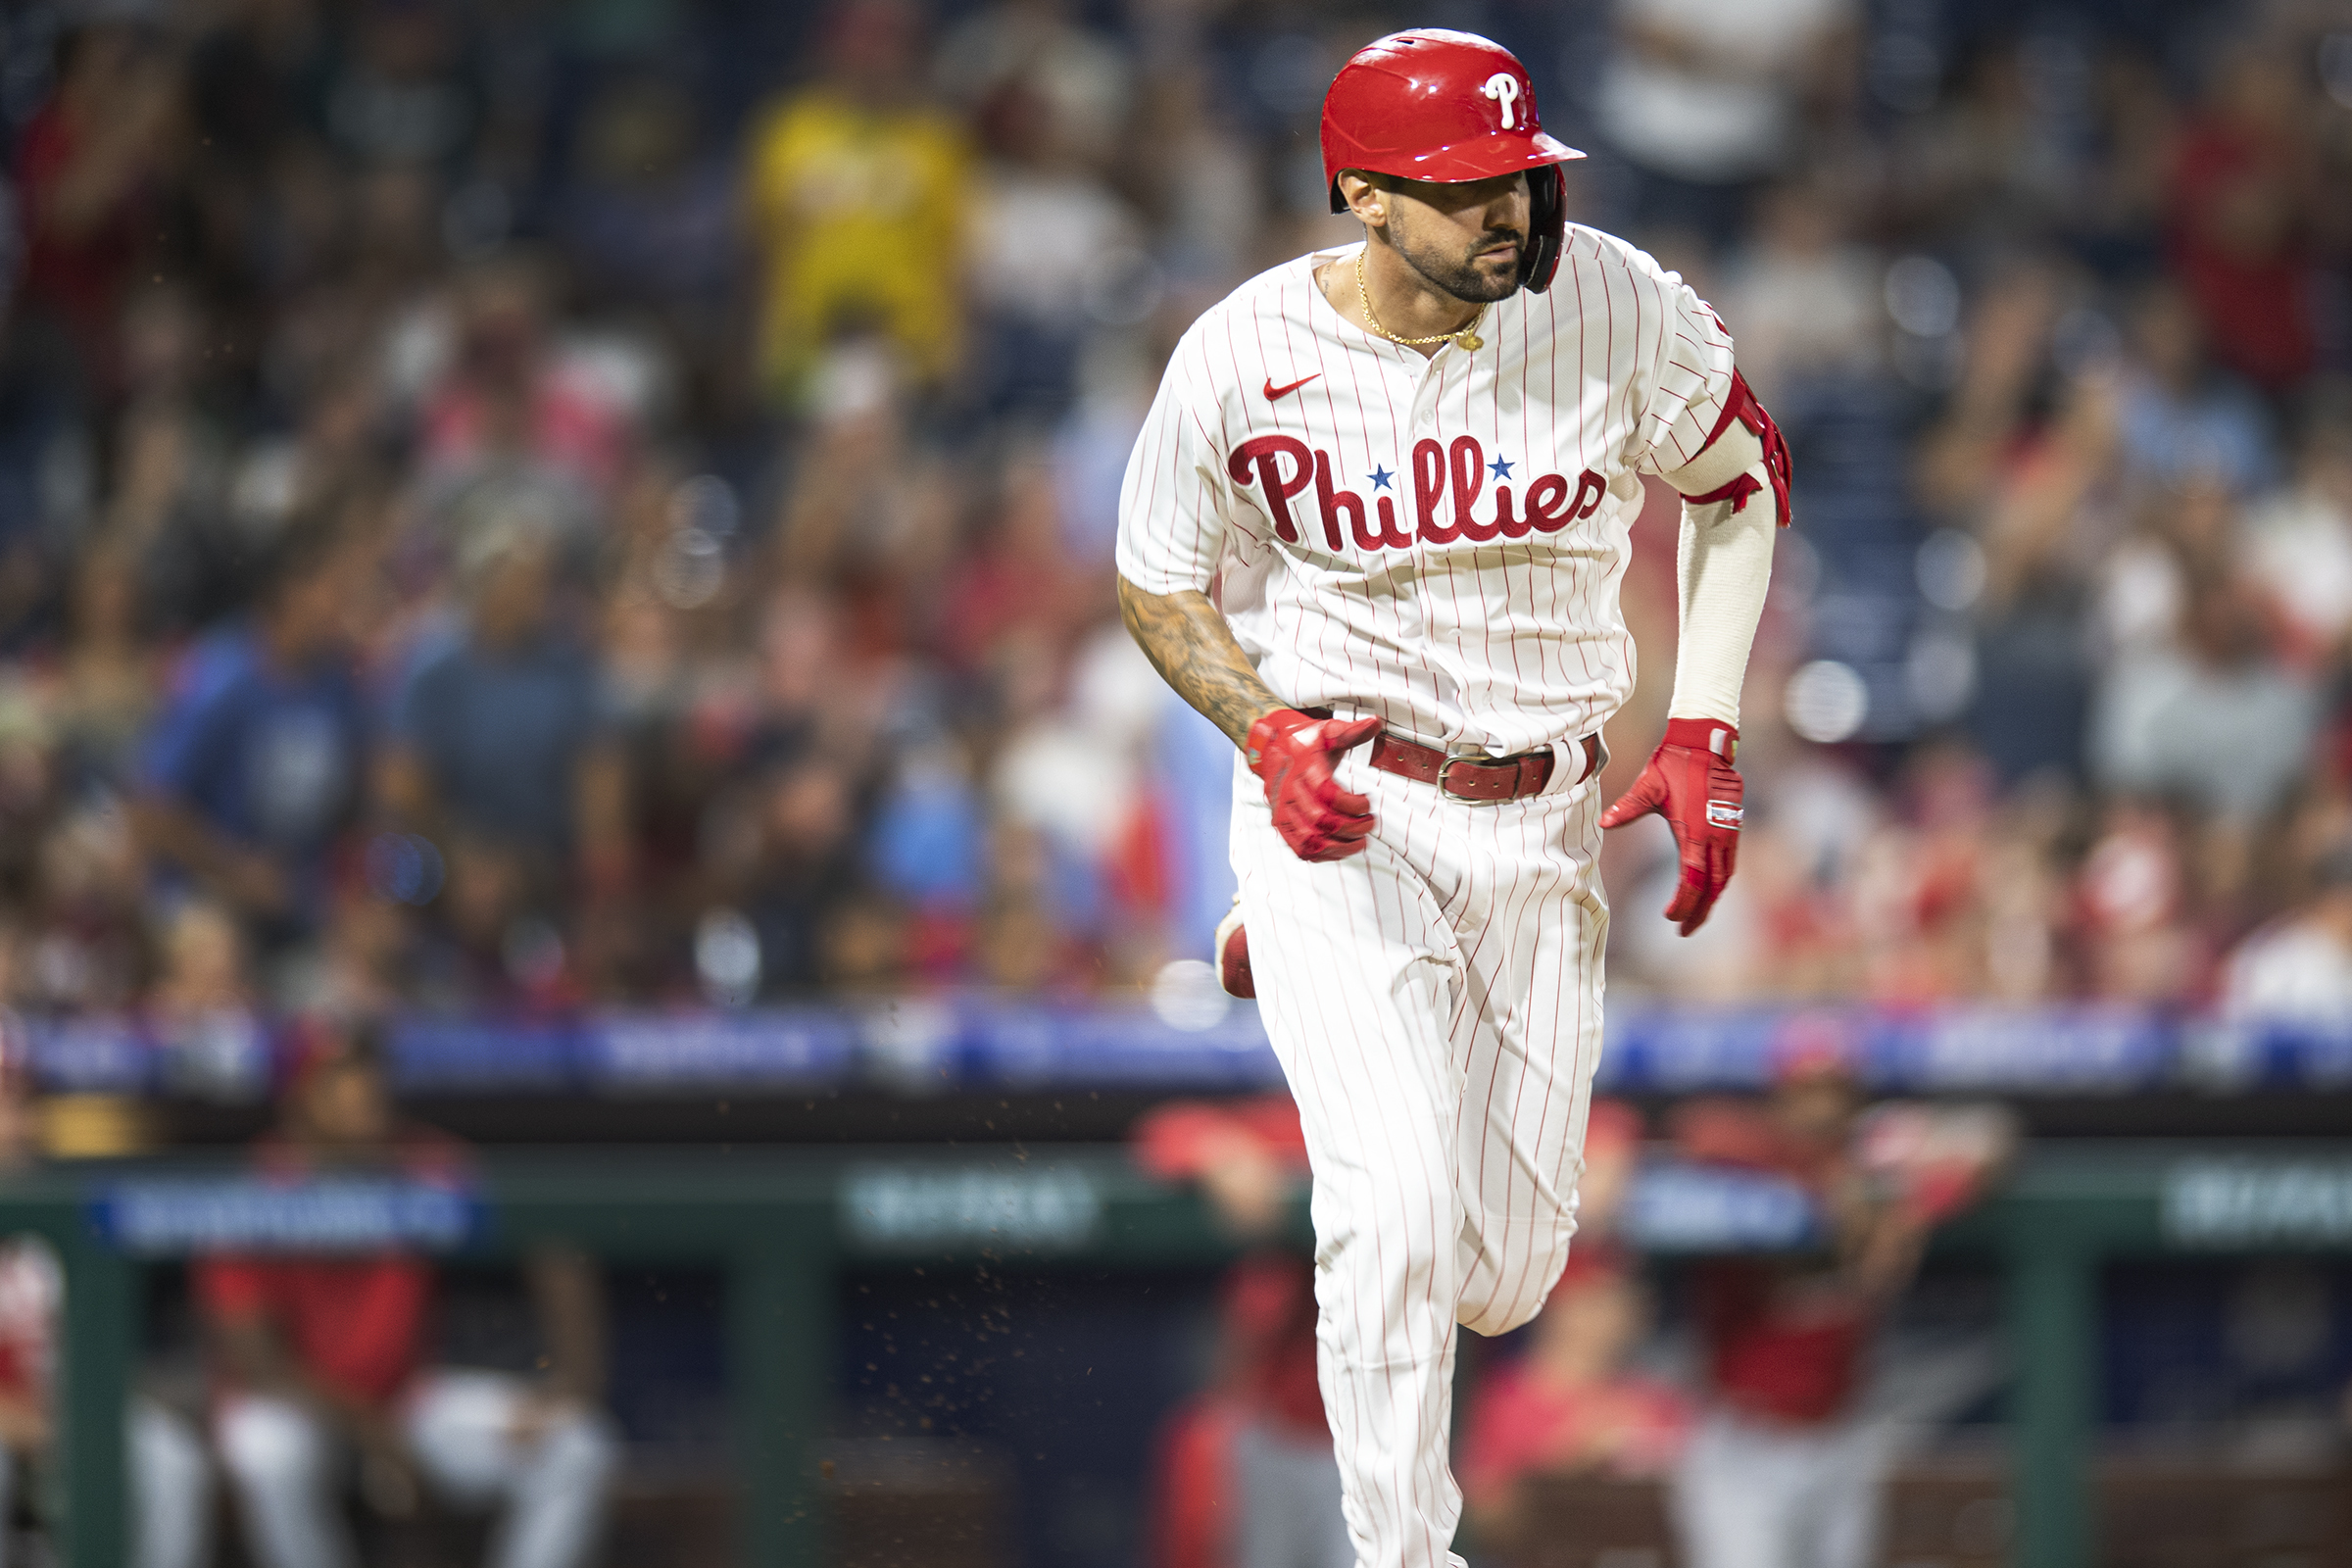 Maton's walk-off single gives Phillies 7-6 win over Reds